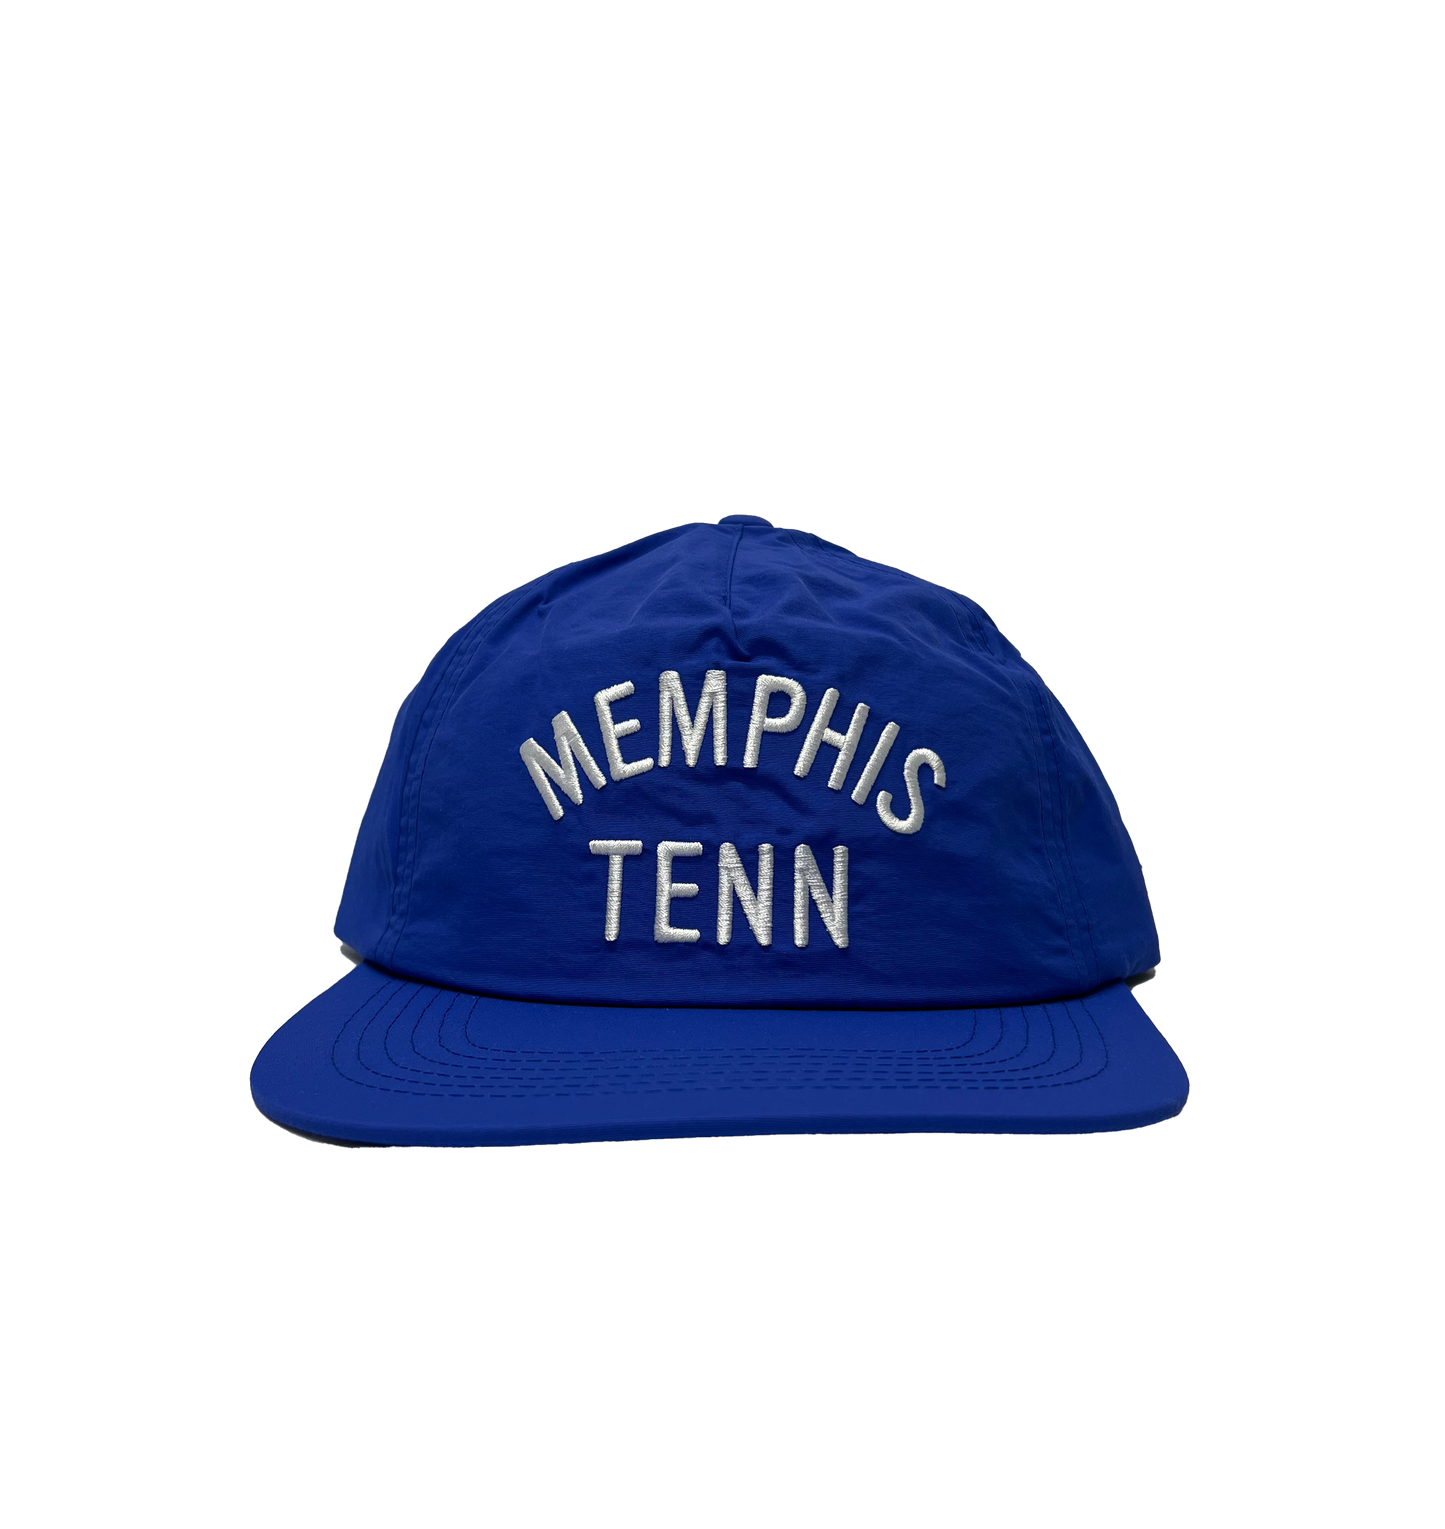 A Memphis Tenn Nylon Hat Royal Blue with "memphis tenn" embroidered in white, placed on a striped gray background by Choose901 Merch Shop.